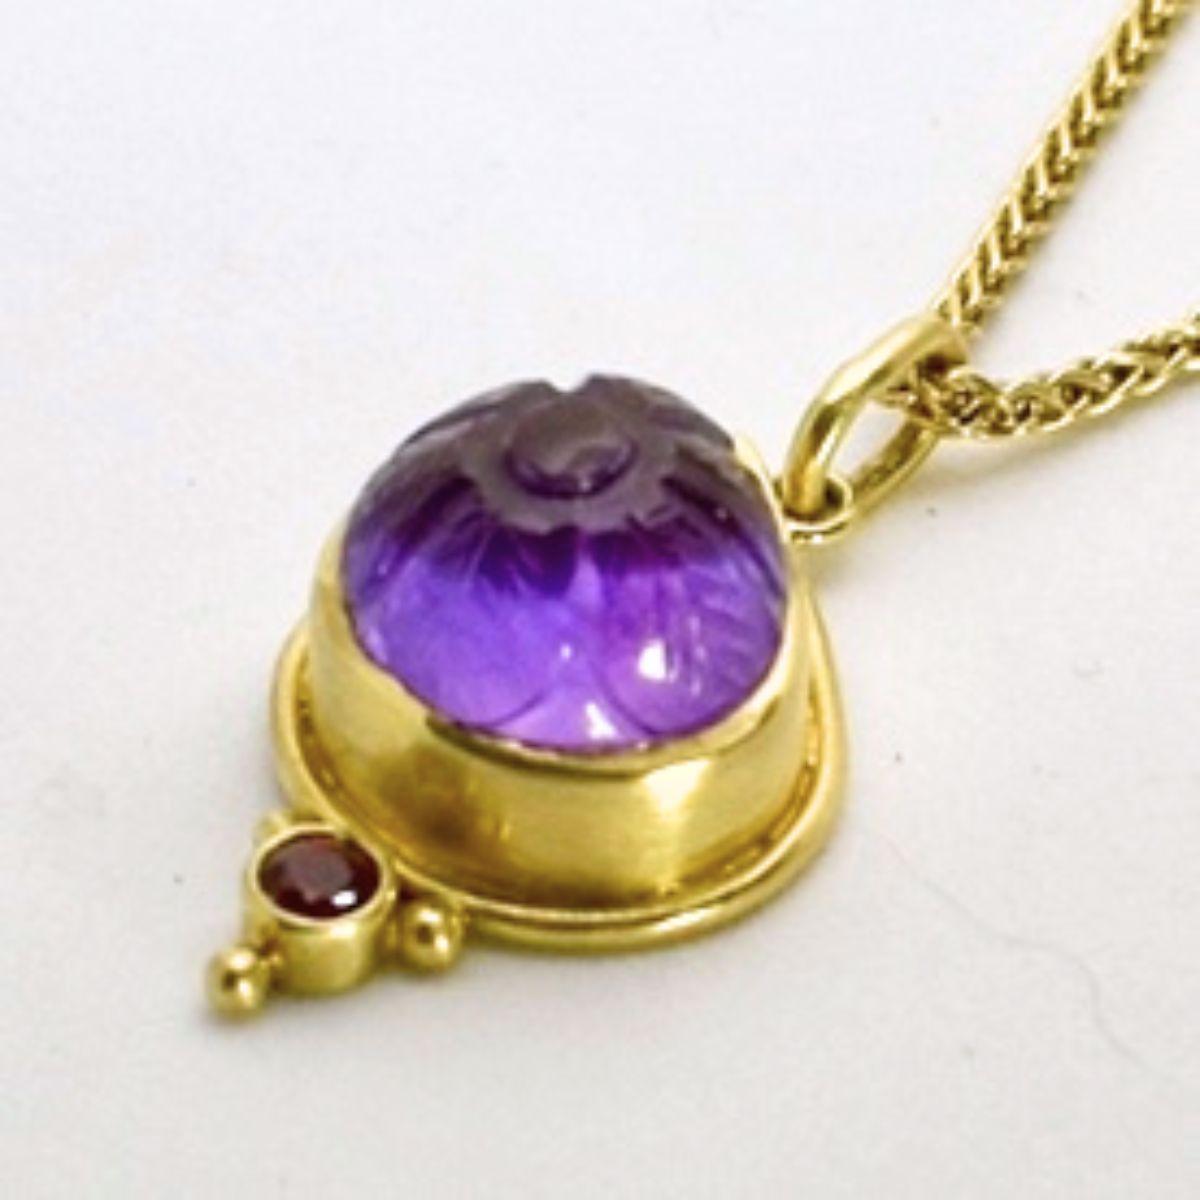 Hand fabricated by Lynn Kathyrn Miller of Lynn K Designs, this timeless one of a kind pendant harkens back to the Byzantine era. 

This unique hand fabricated pendant consists of a prominently displayed hand carved royal purple amethyst and a